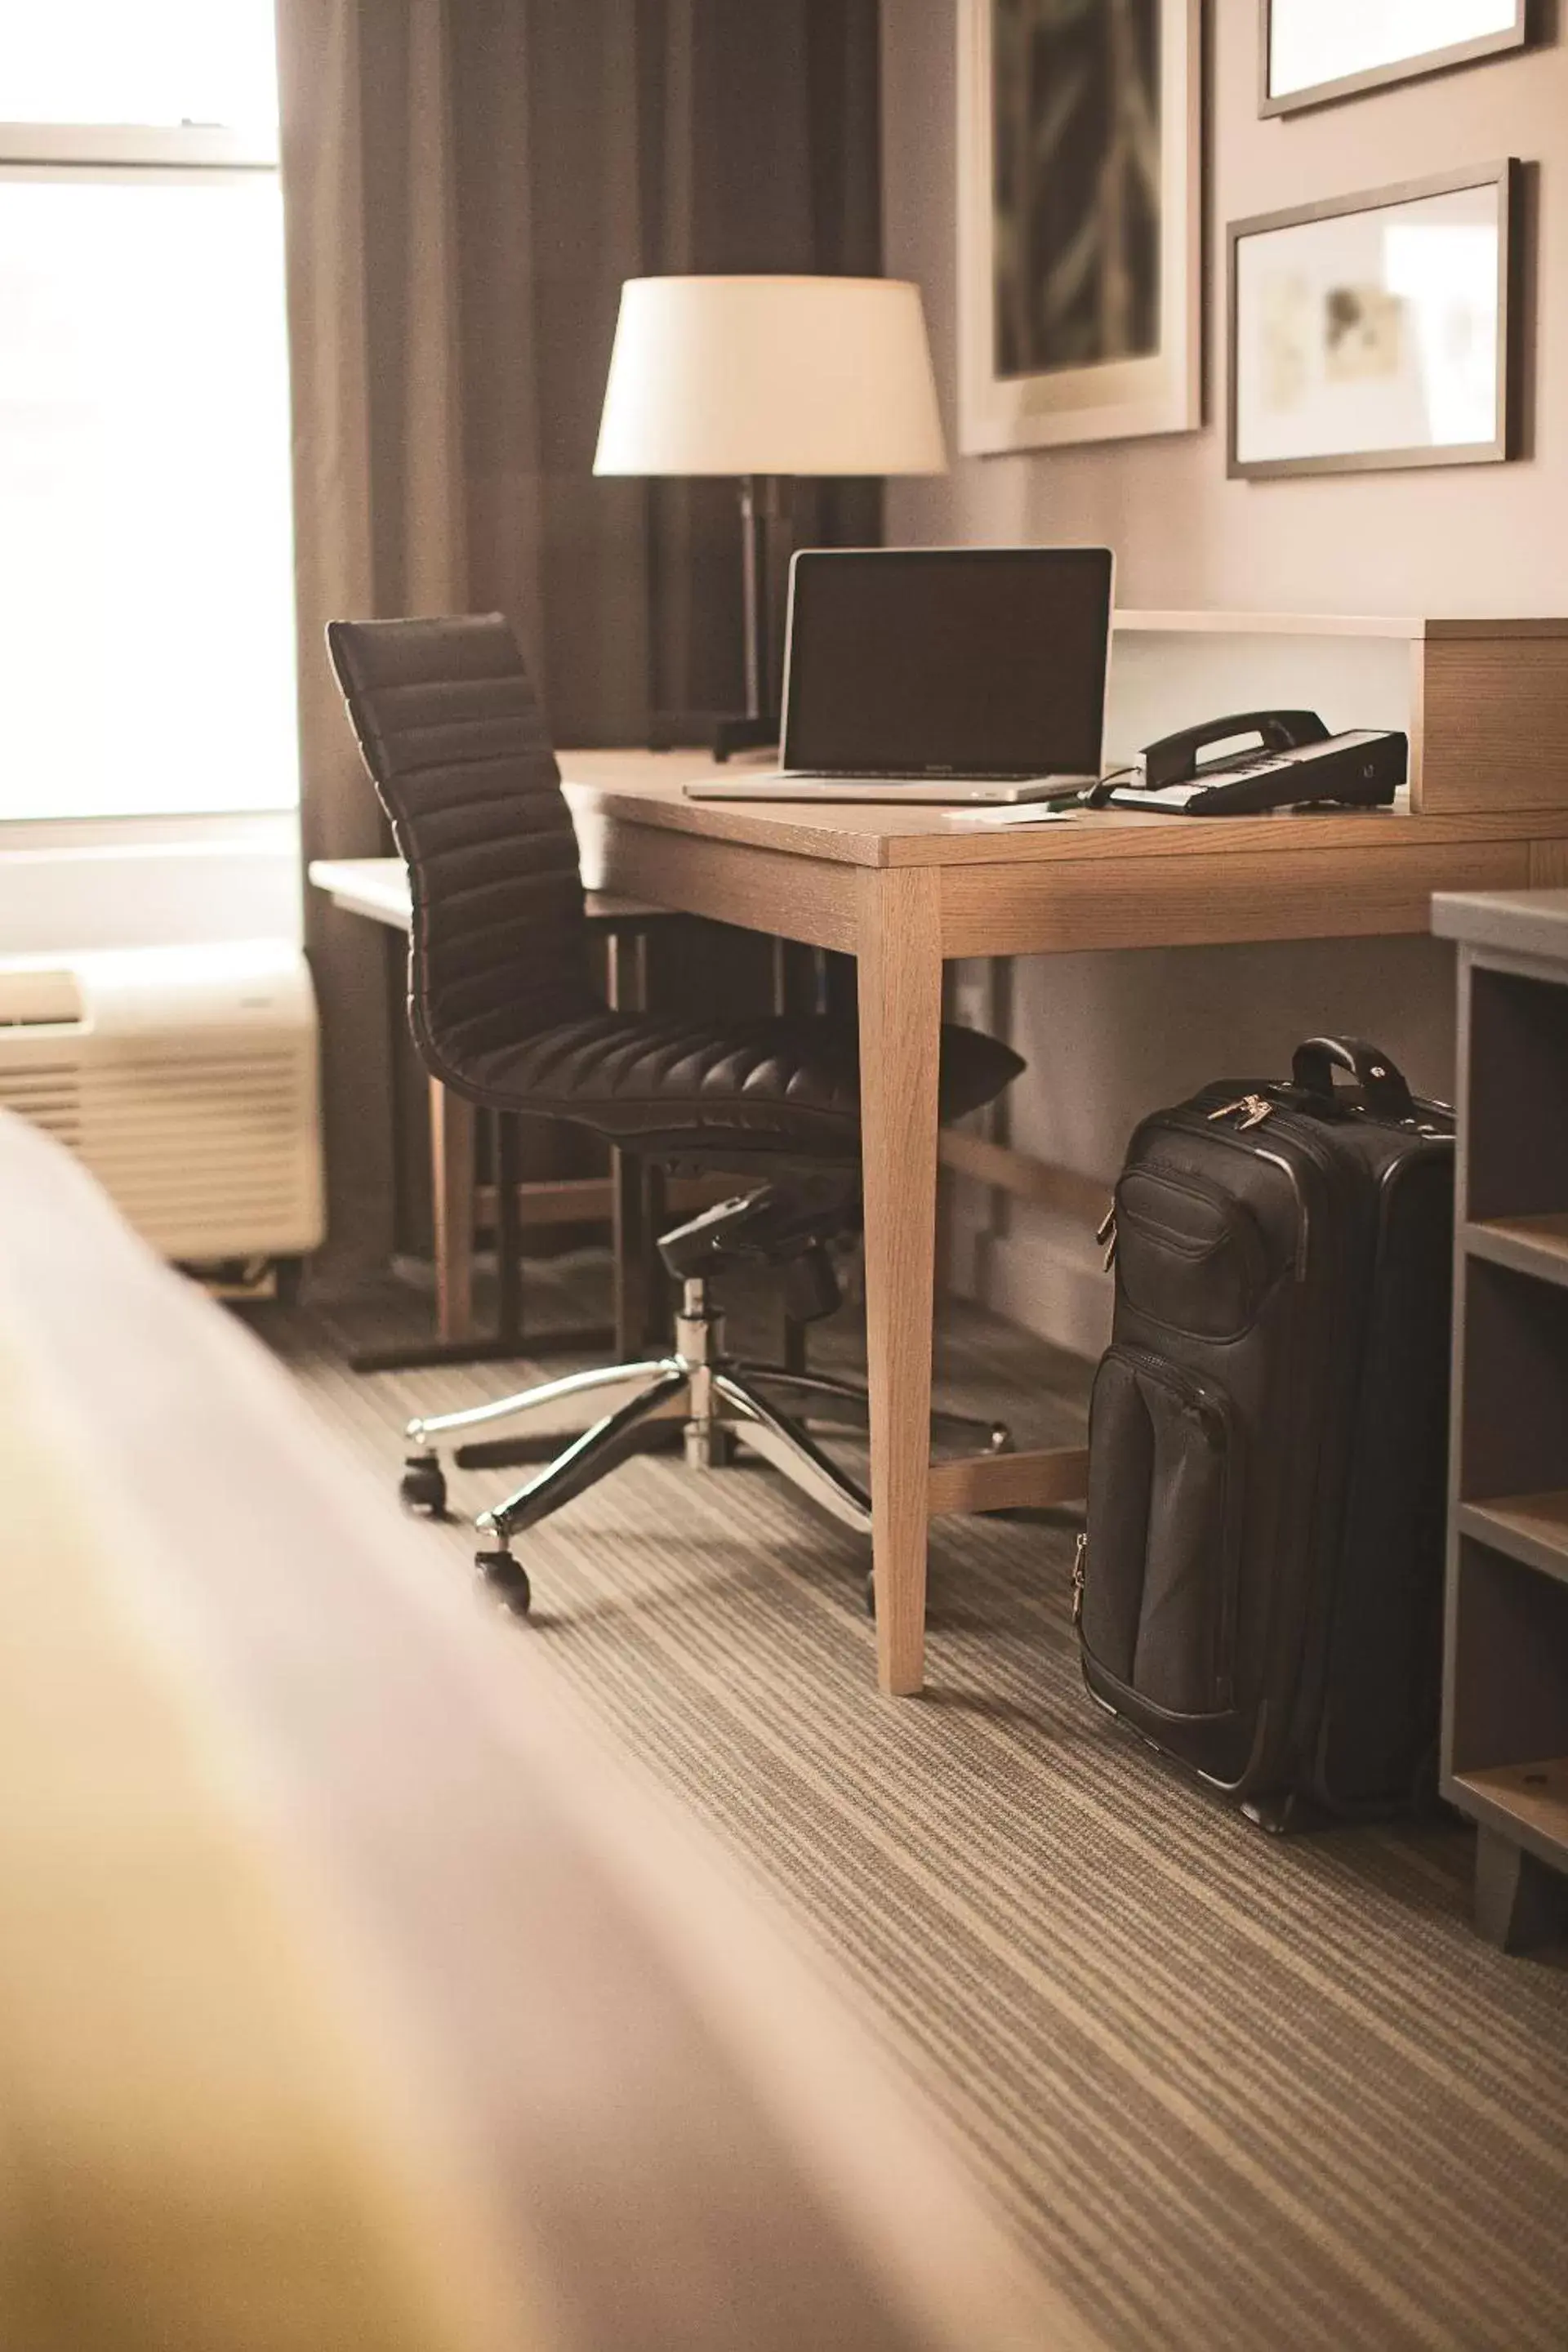 Business facilities in Country Inn & Suites by Radisson, Schaumburg, IL